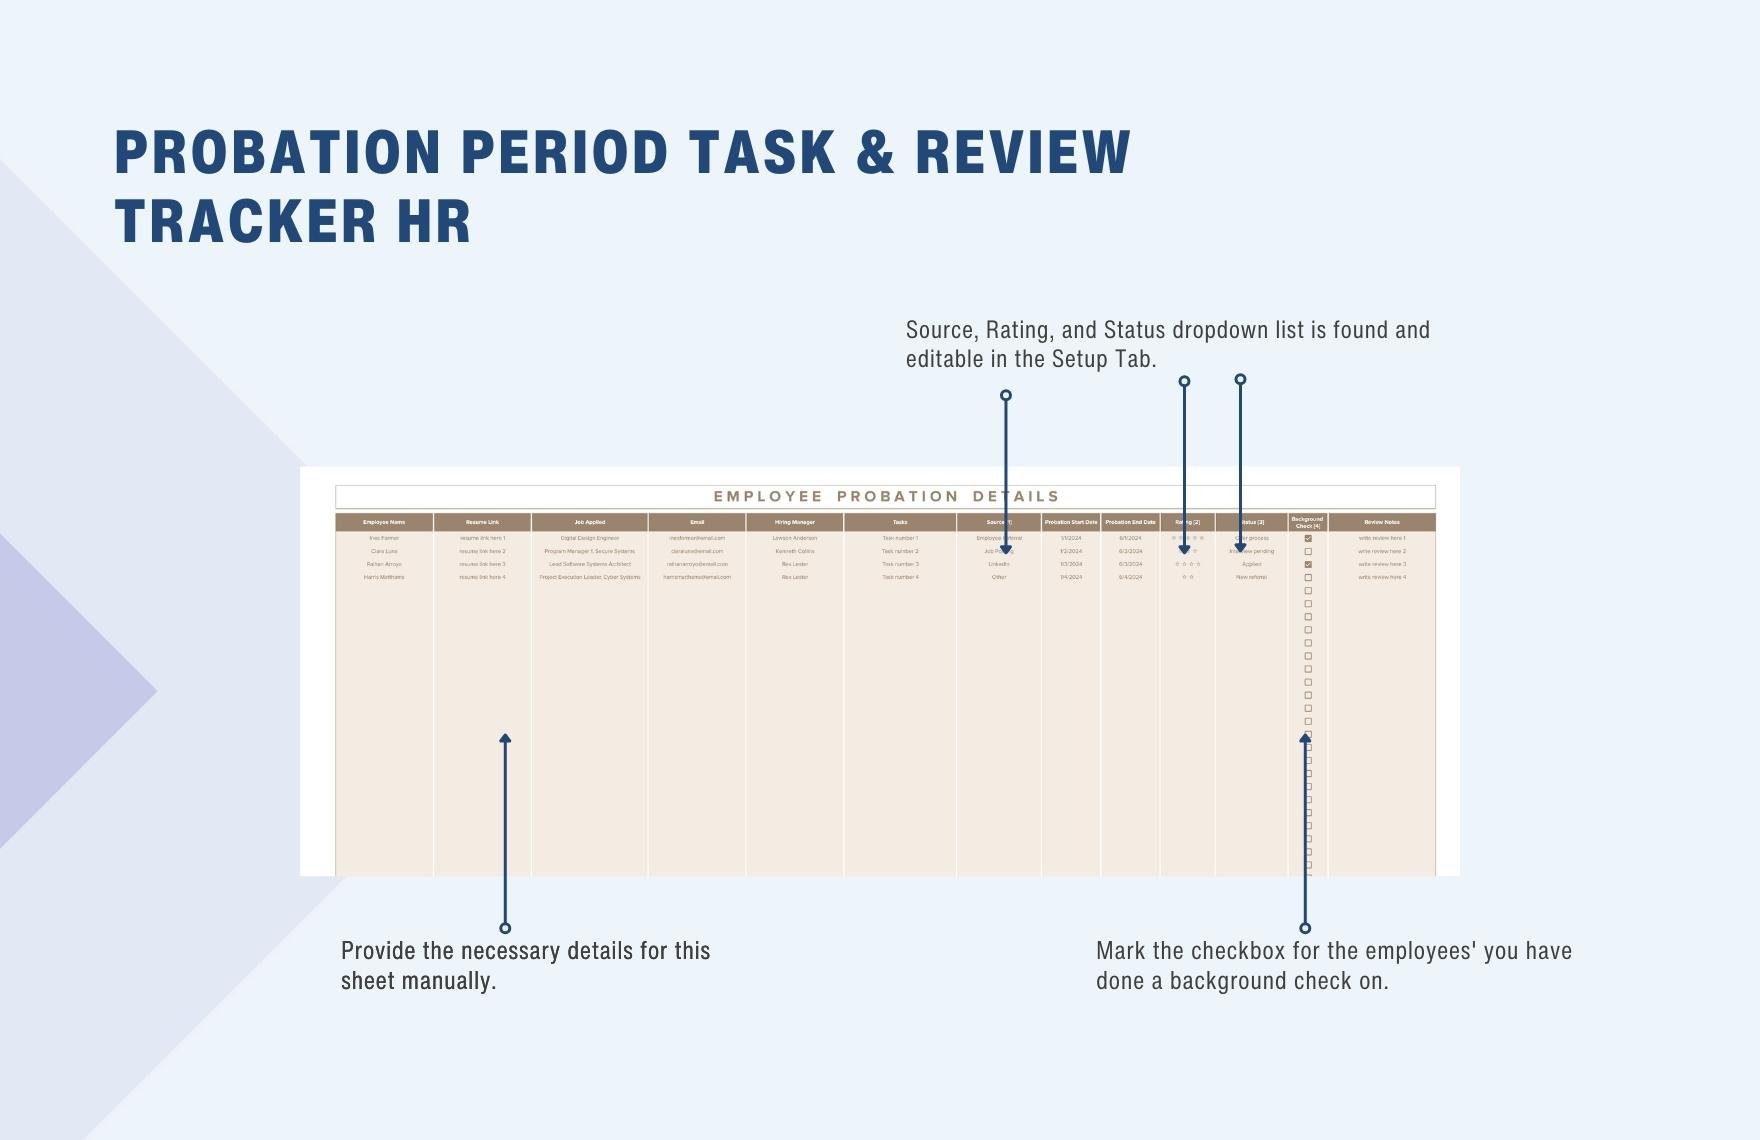 Probation Period Task & Review Tracker HR Template